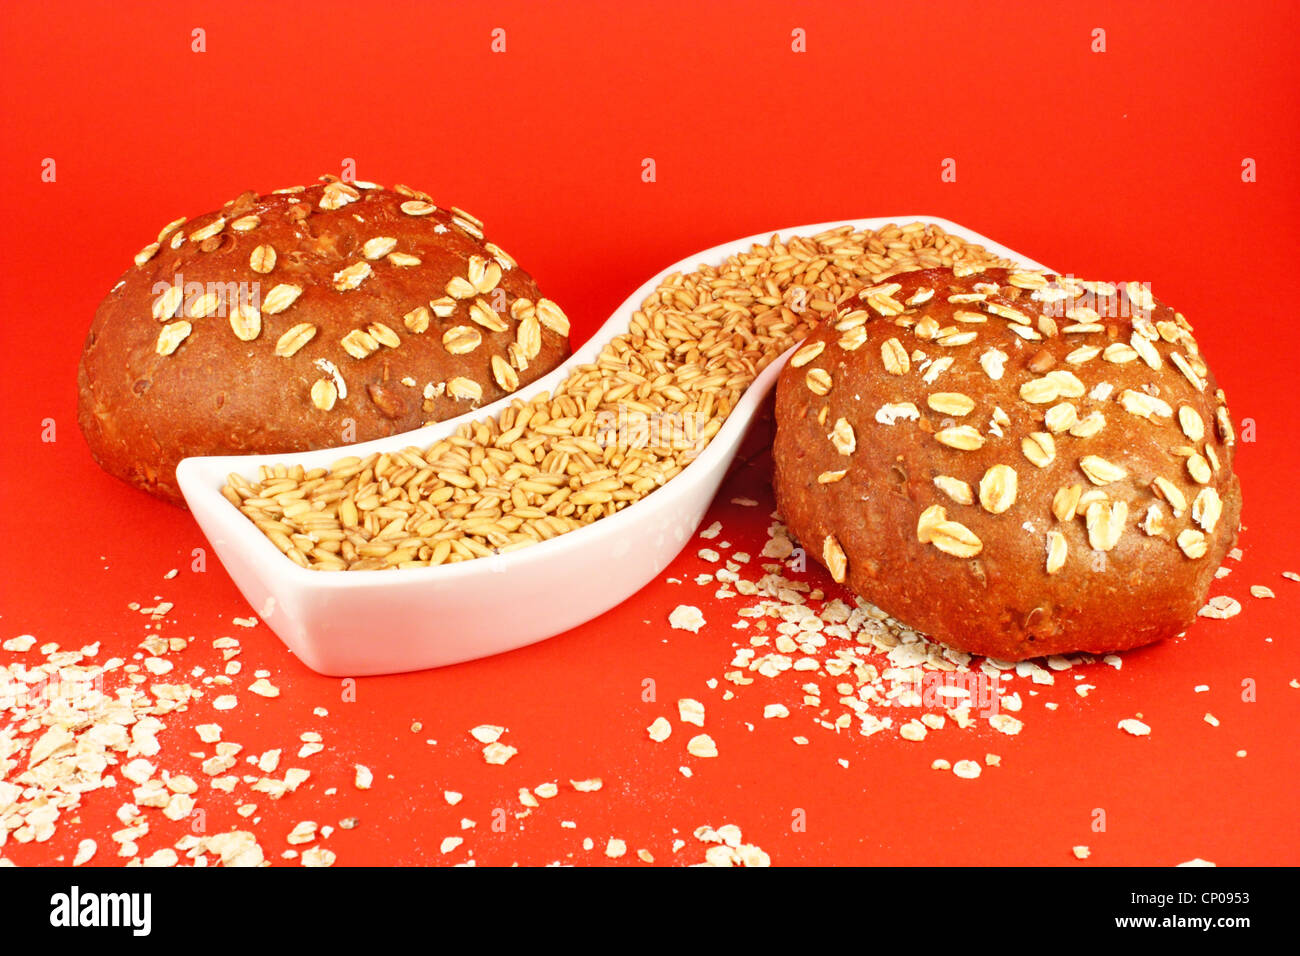 Two pastries with oat seeds on red background Stock Photo